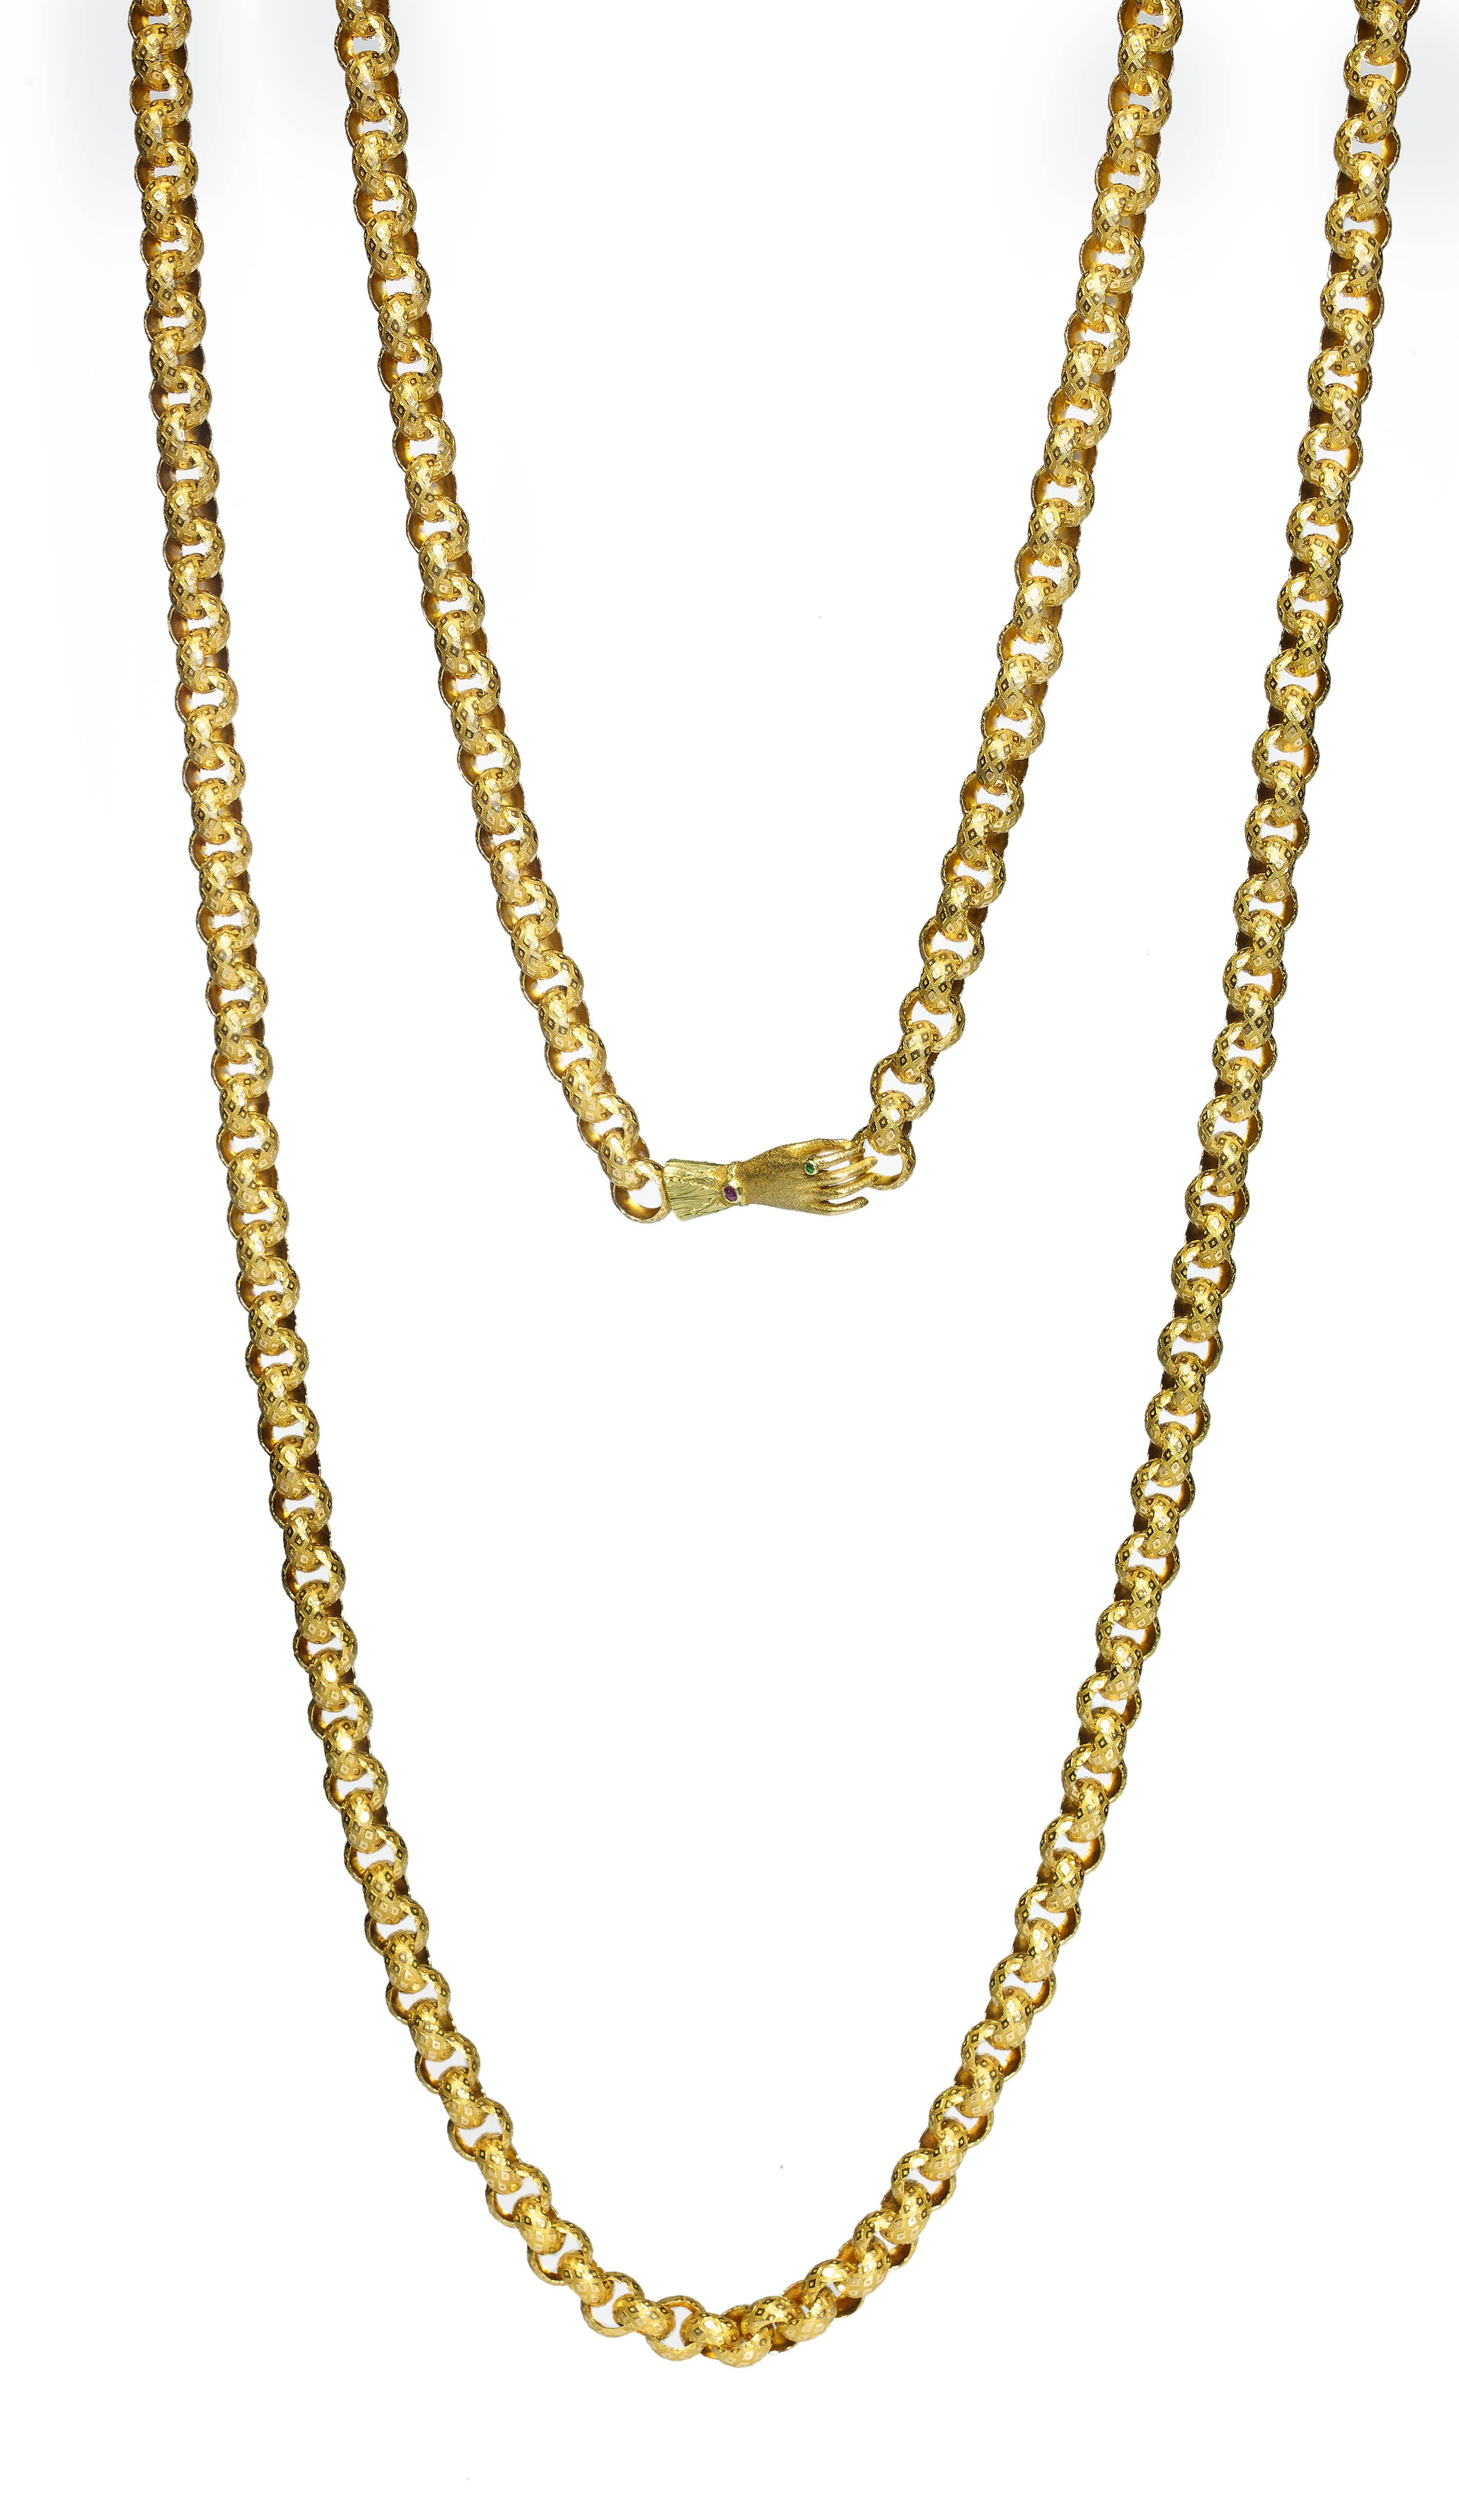 Round Cut Georgian 18 Carat Gold Long Chain with Hand Clasp